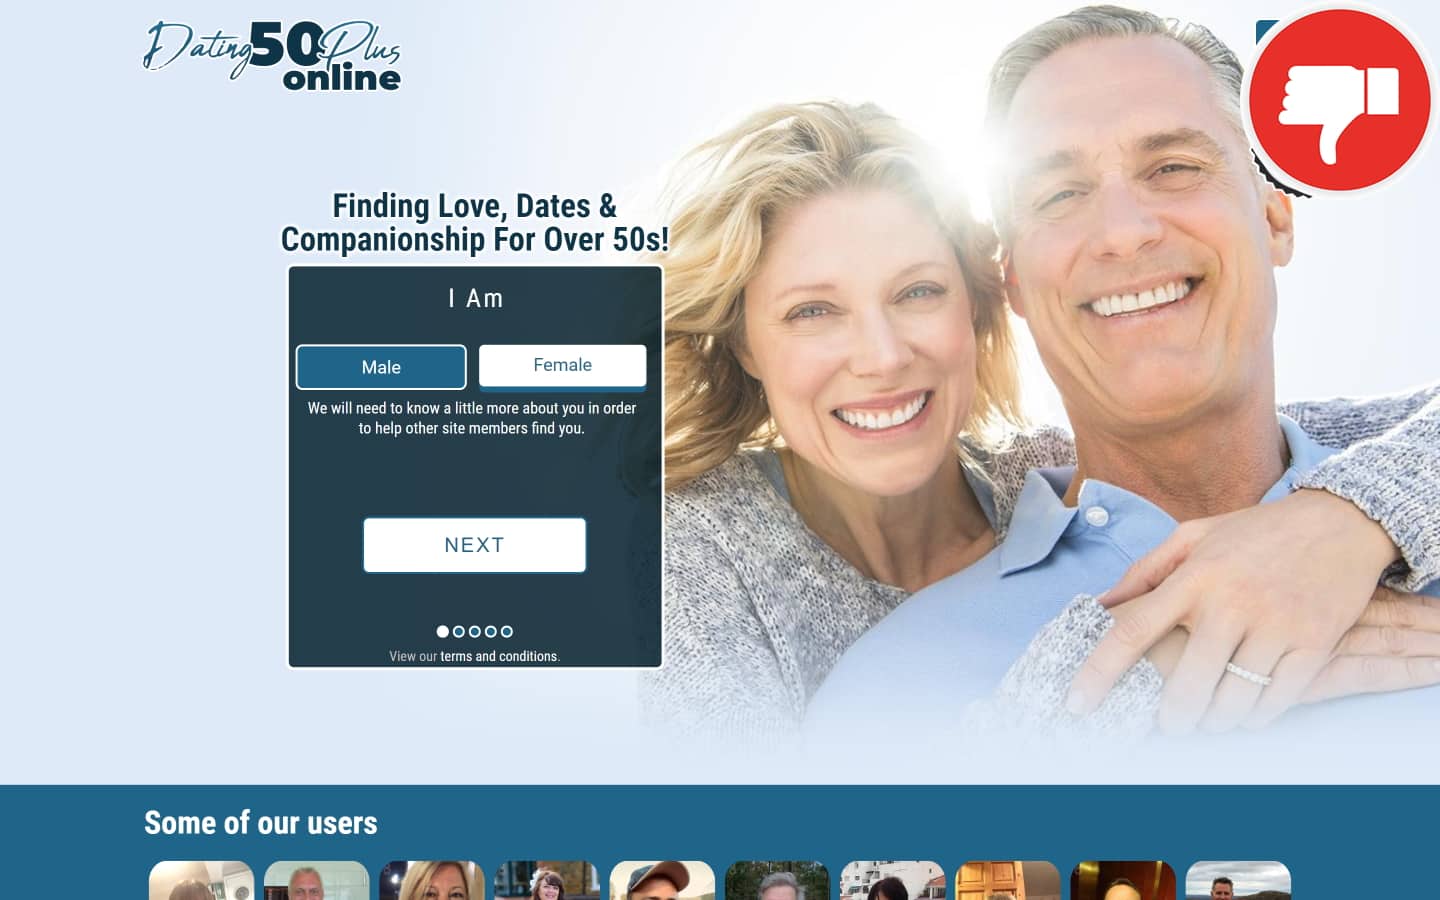 Review Dating50Plus.online Scam